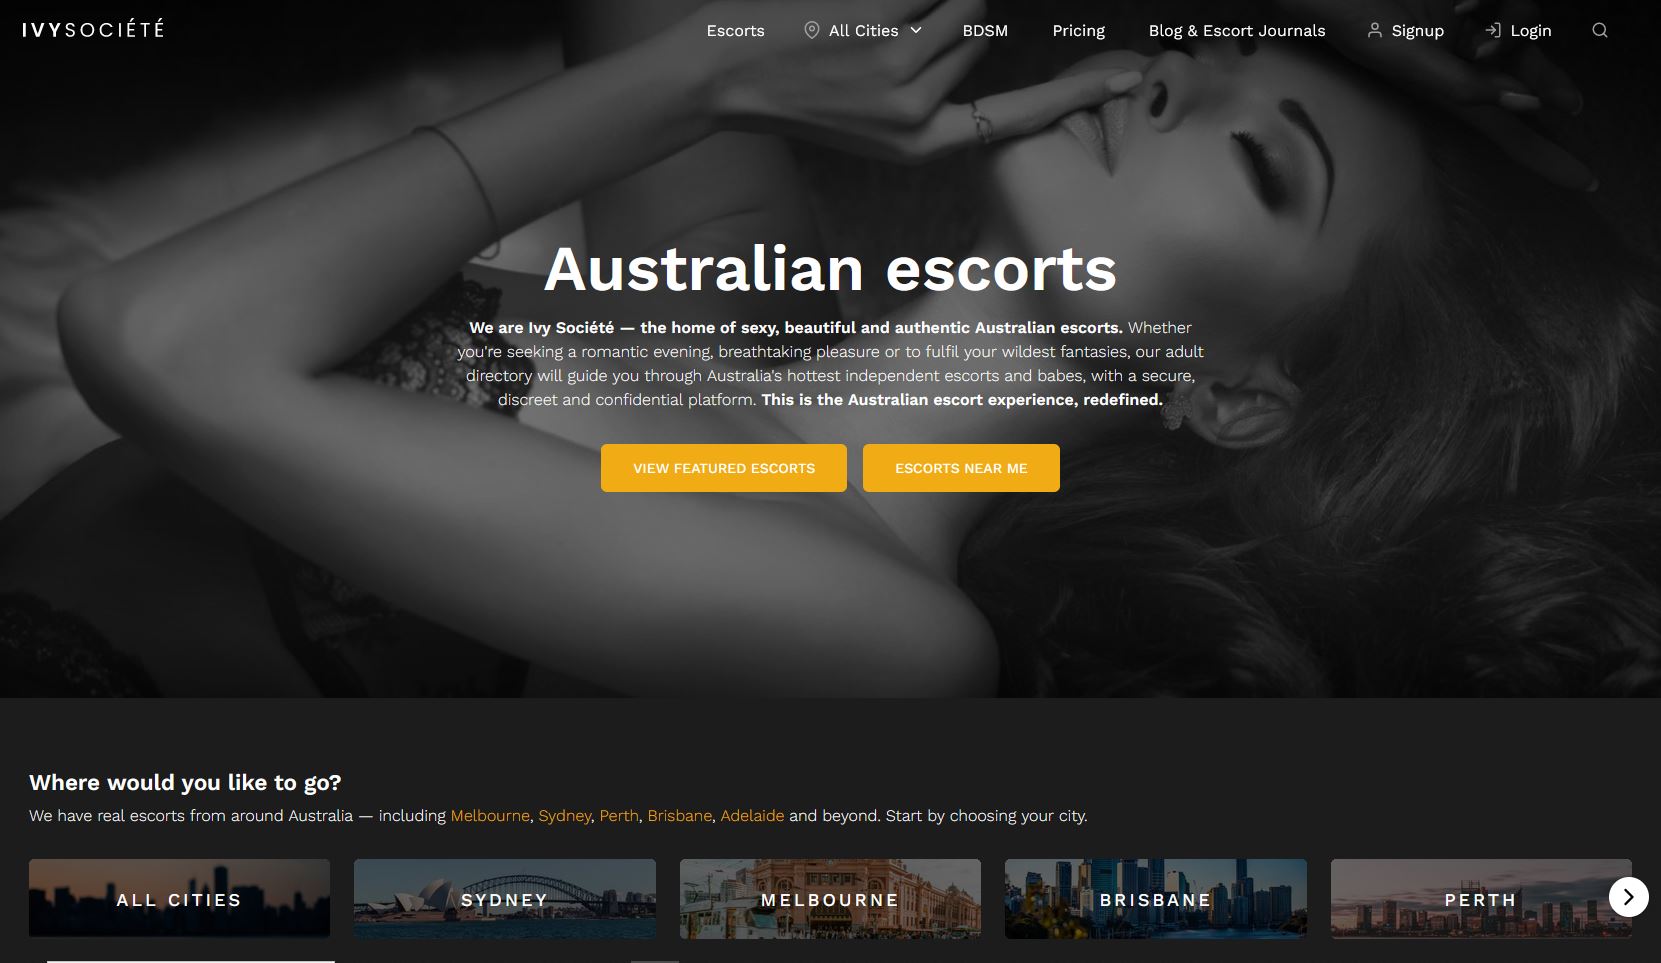 Why Should You Consider Hiring Australian escorts whether you are a local or not